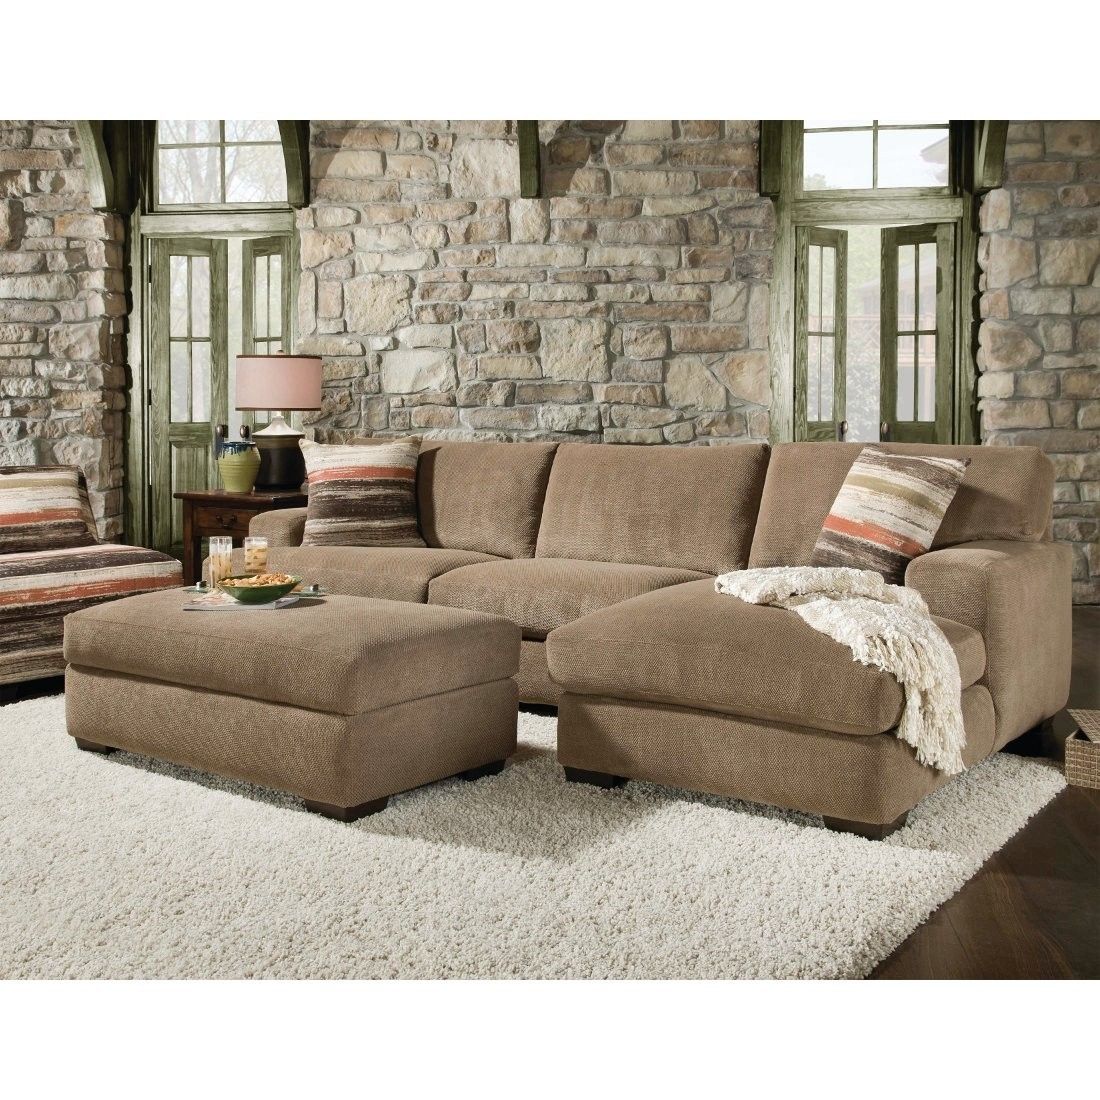 Beautiful Sectional Sofa With Chaise And Ottoman Pictures Pertaining To Sectional Sofas With Chaise And Ottoman (Photo 1 of 15)